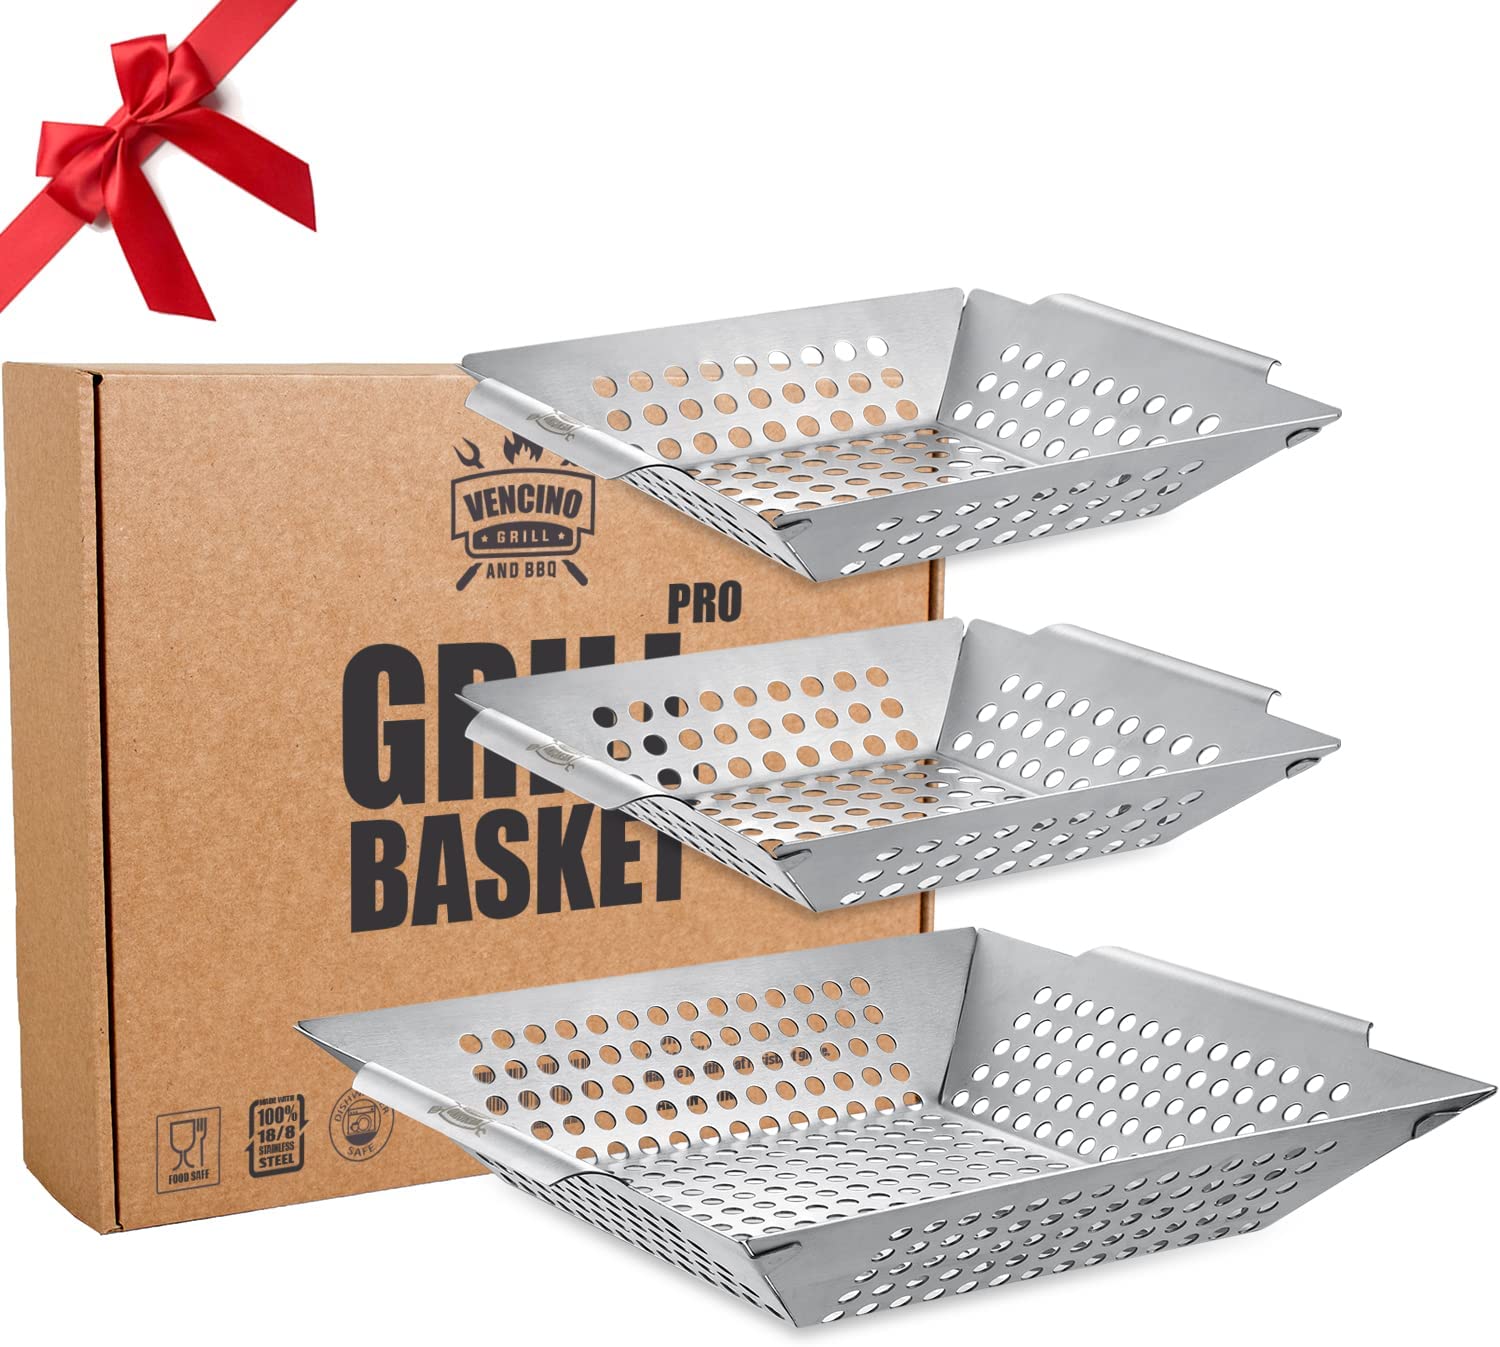 3 Pack Grill Baskets for Outdoor Grill, Heavy Duty Stainless Steel Vegetable Grill Basket, Grilling Basket for Veggies, Grilling Accessories for All Grills & Smokers - Grilling Gifts for Men - image 1 of 7